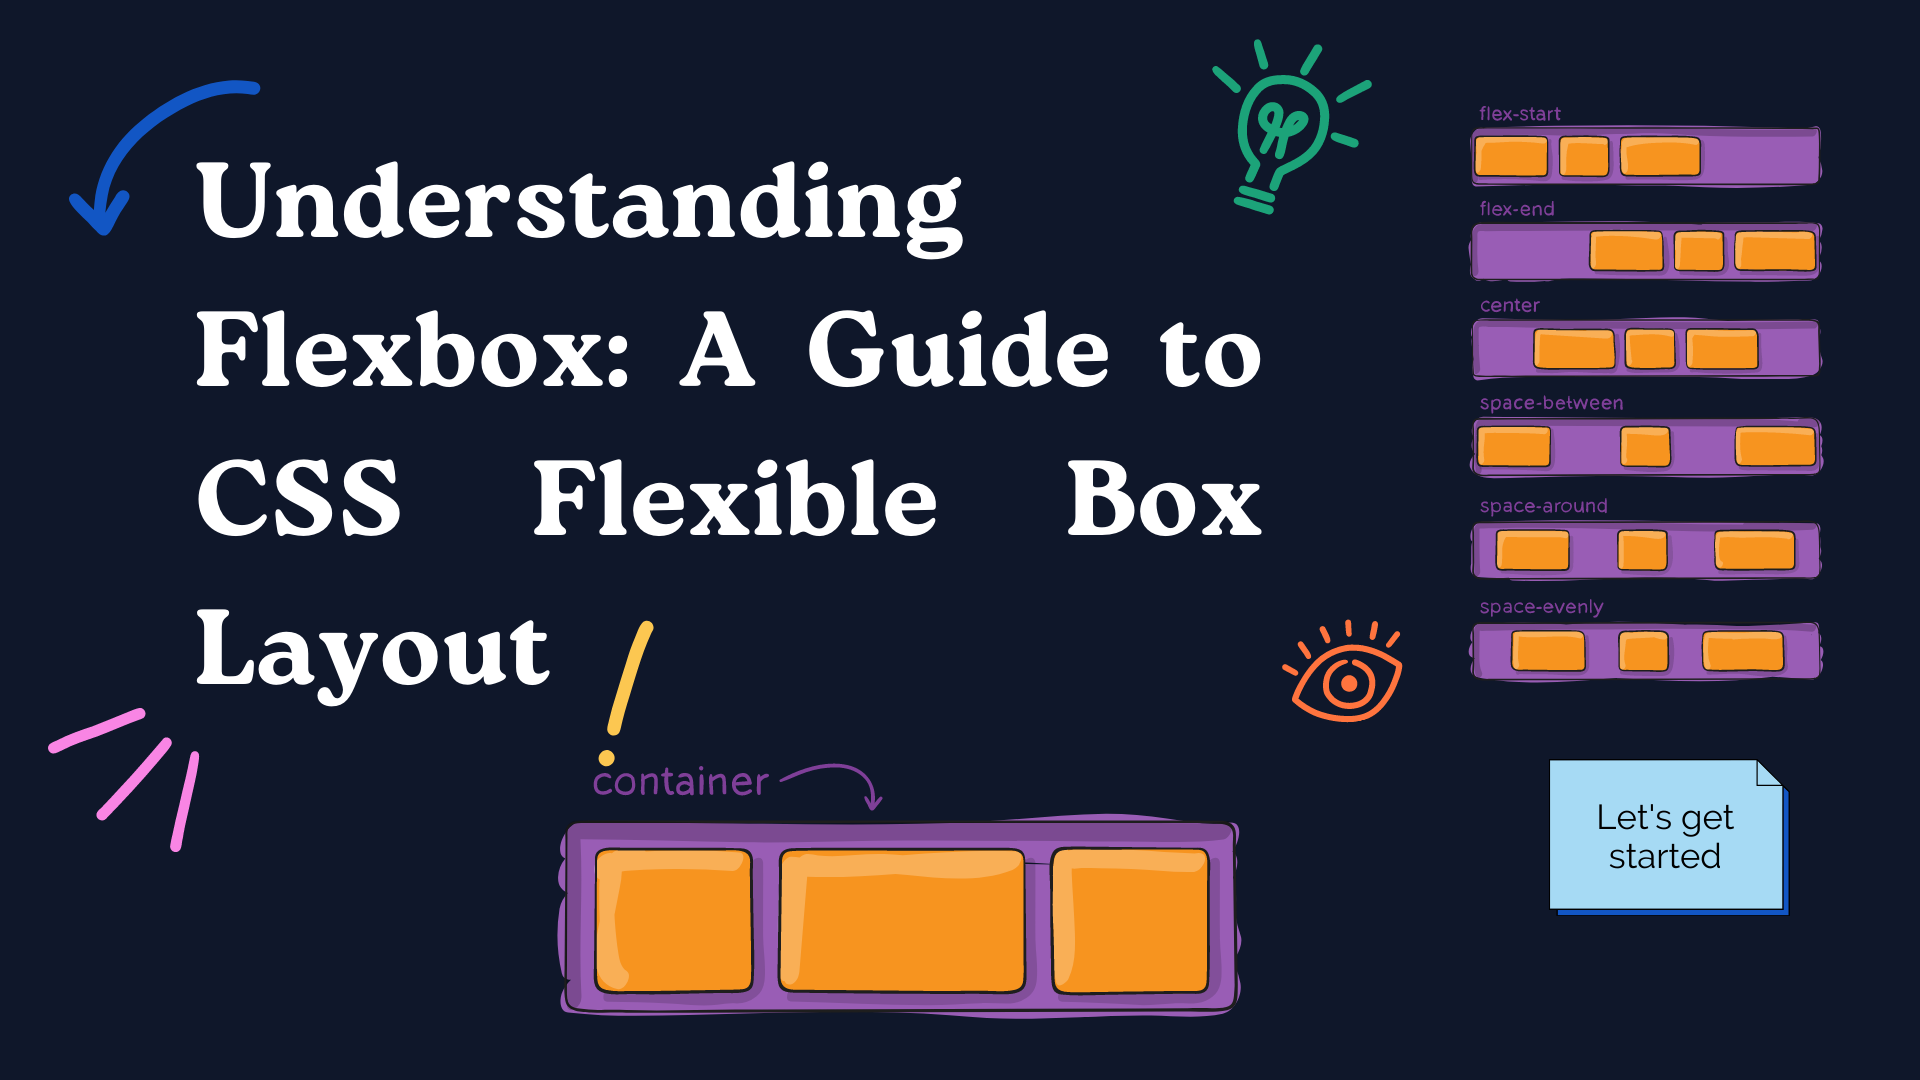 Understanding Flexbox: A Guide to CSS Flexible Box Layout